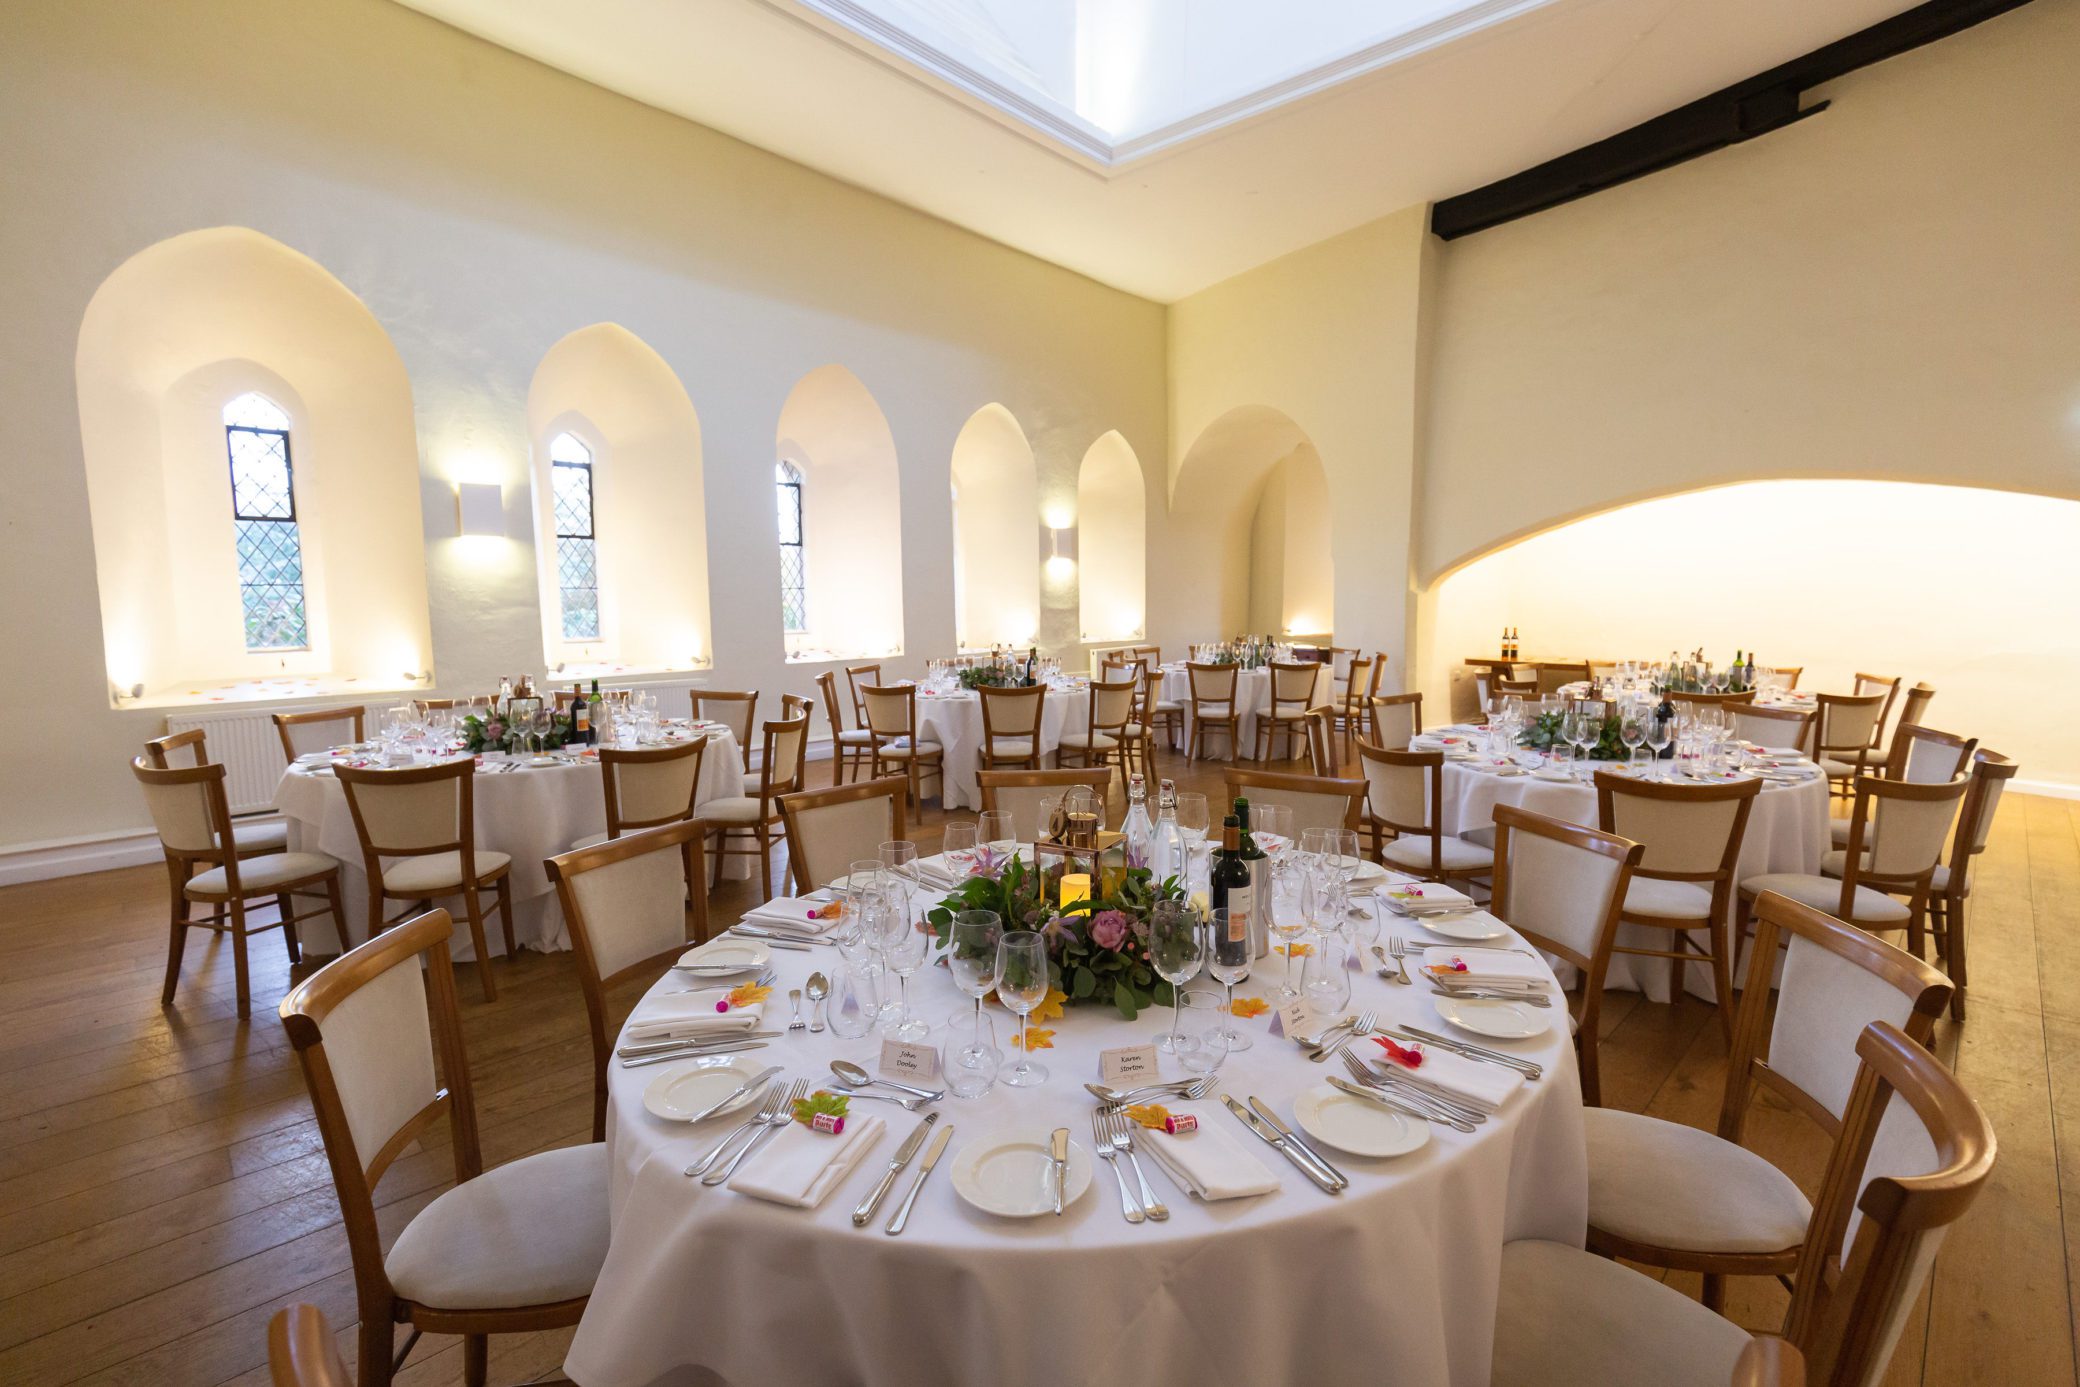 Business lunches at Farnham Castle